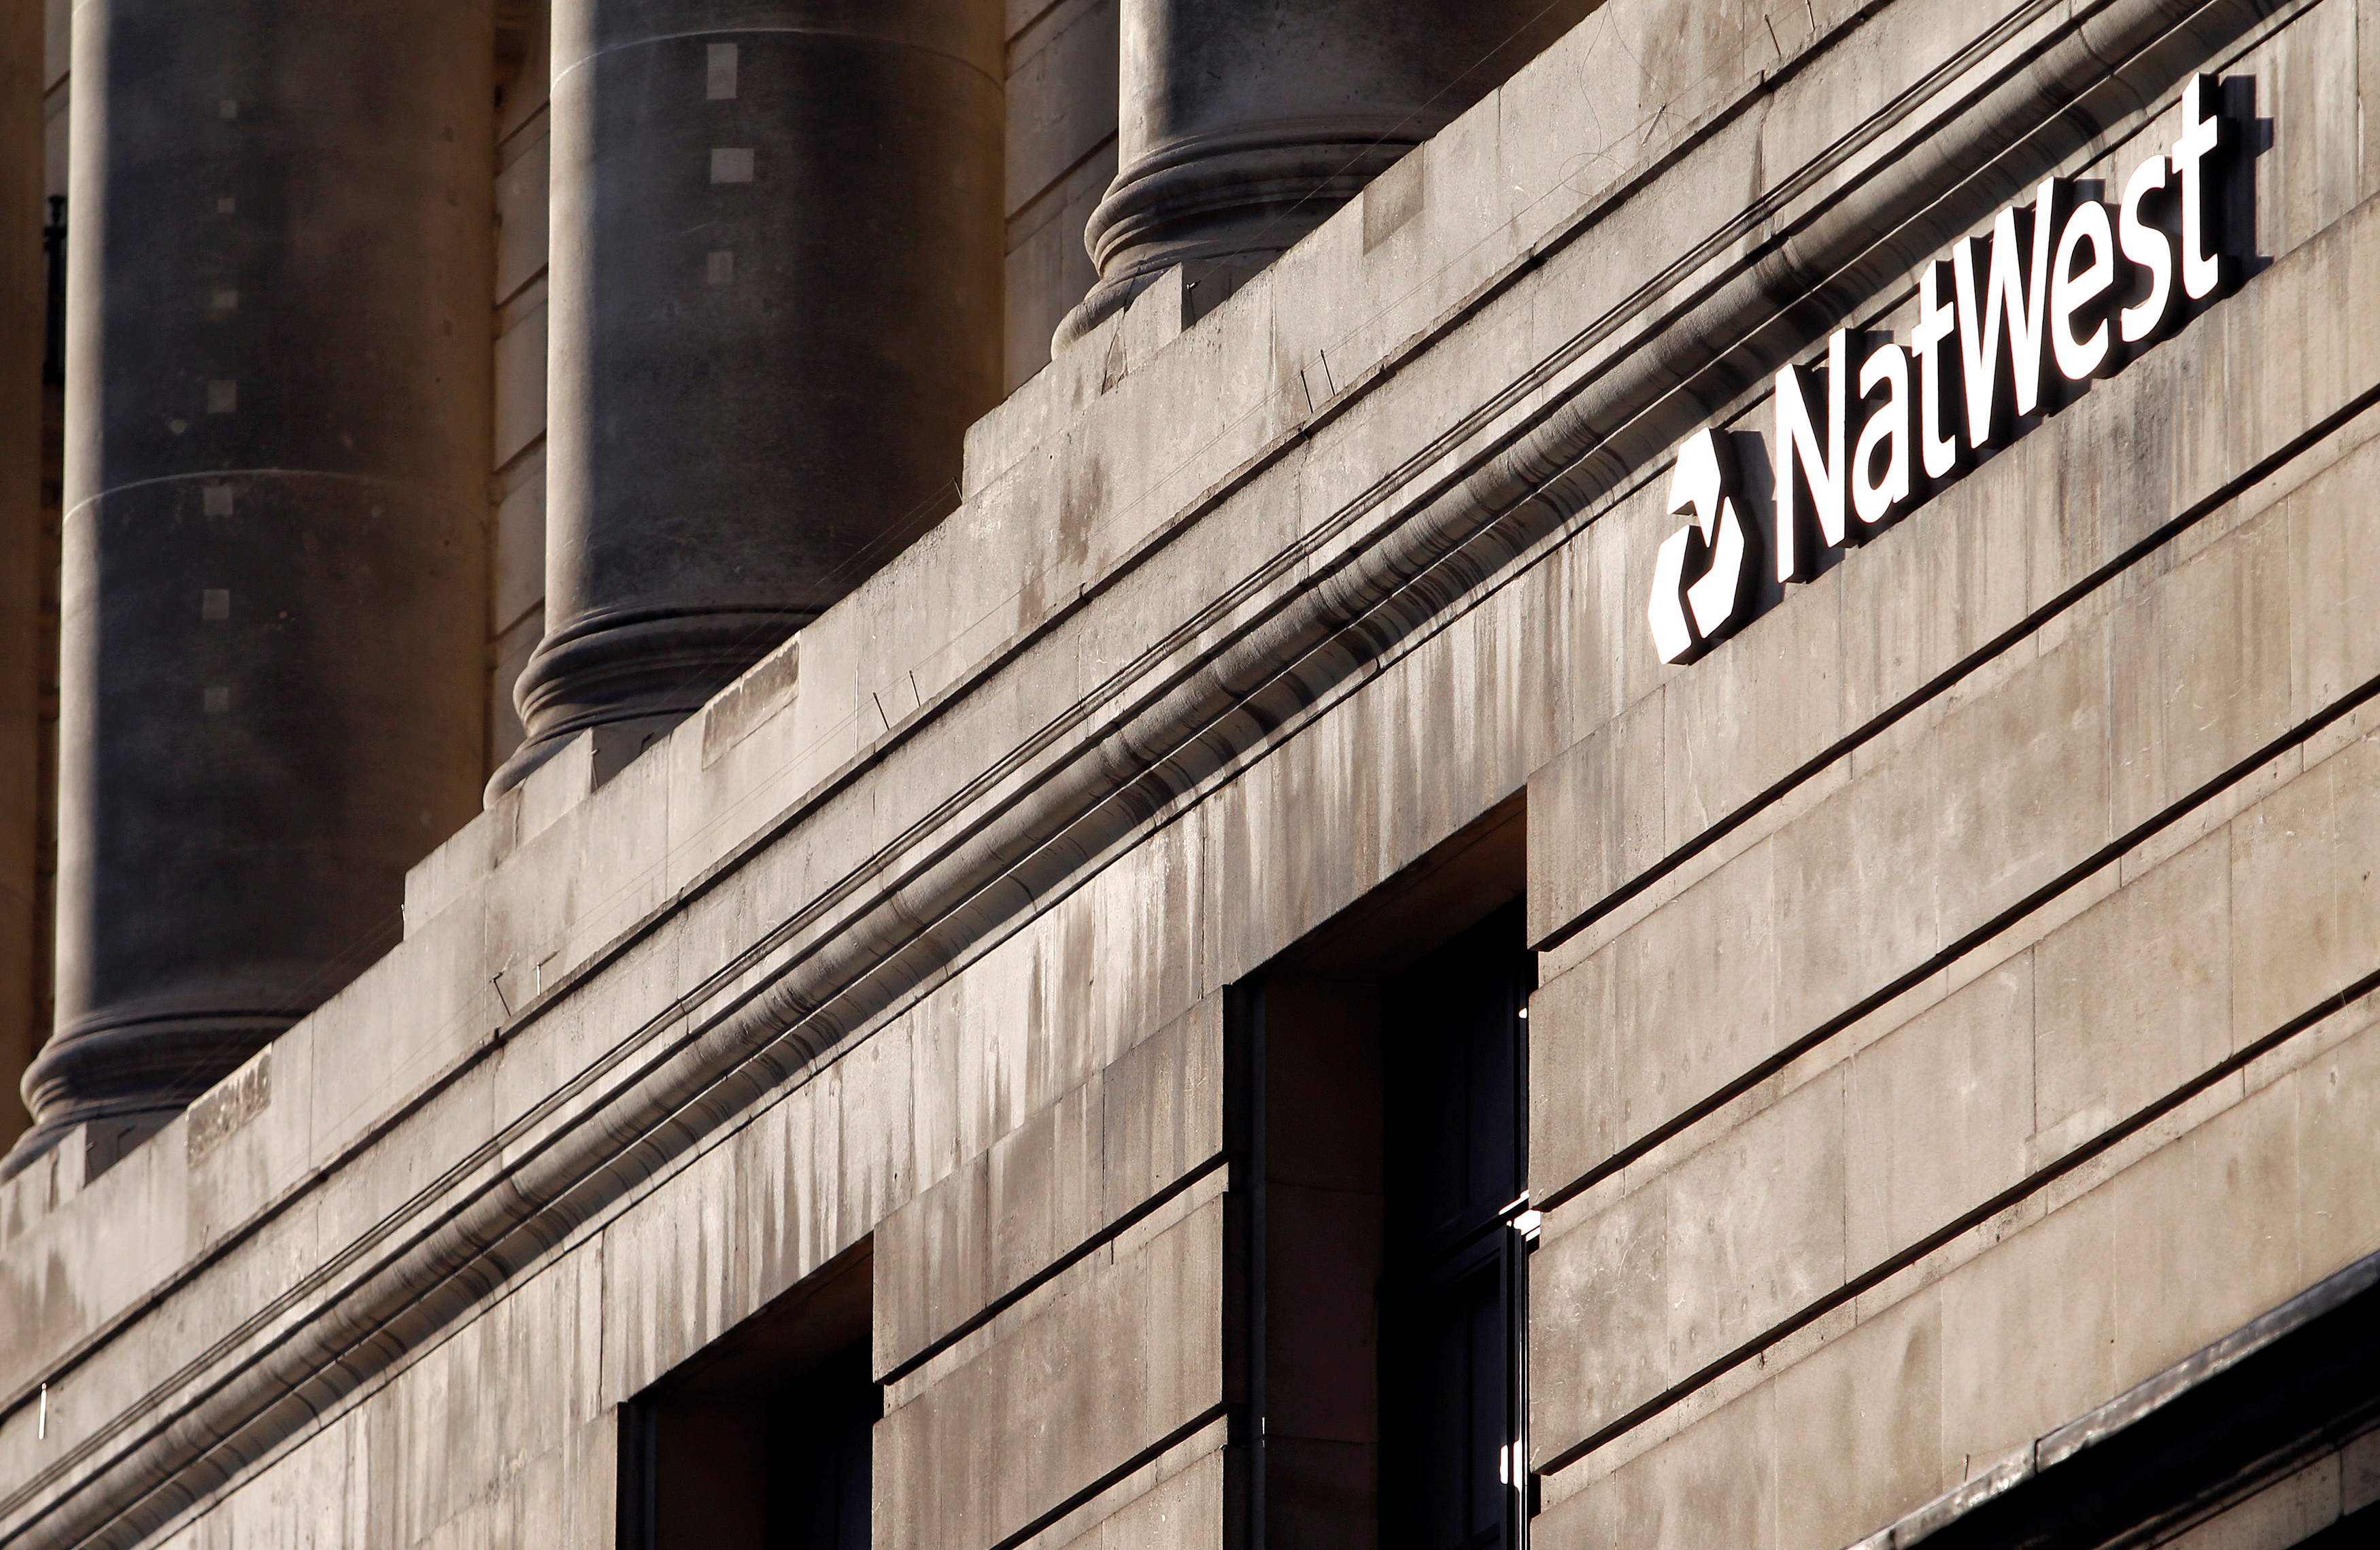 A branch of NatWest Bank is seen in the City of London February 8, 2011. Britain slapped an extra 800 million pound ($1.3 billion) tax on banks this year, taking a harder line on the sector as it negotiates a deal to curb bonuses and free up business lending. REUTERS/Chris Helgren